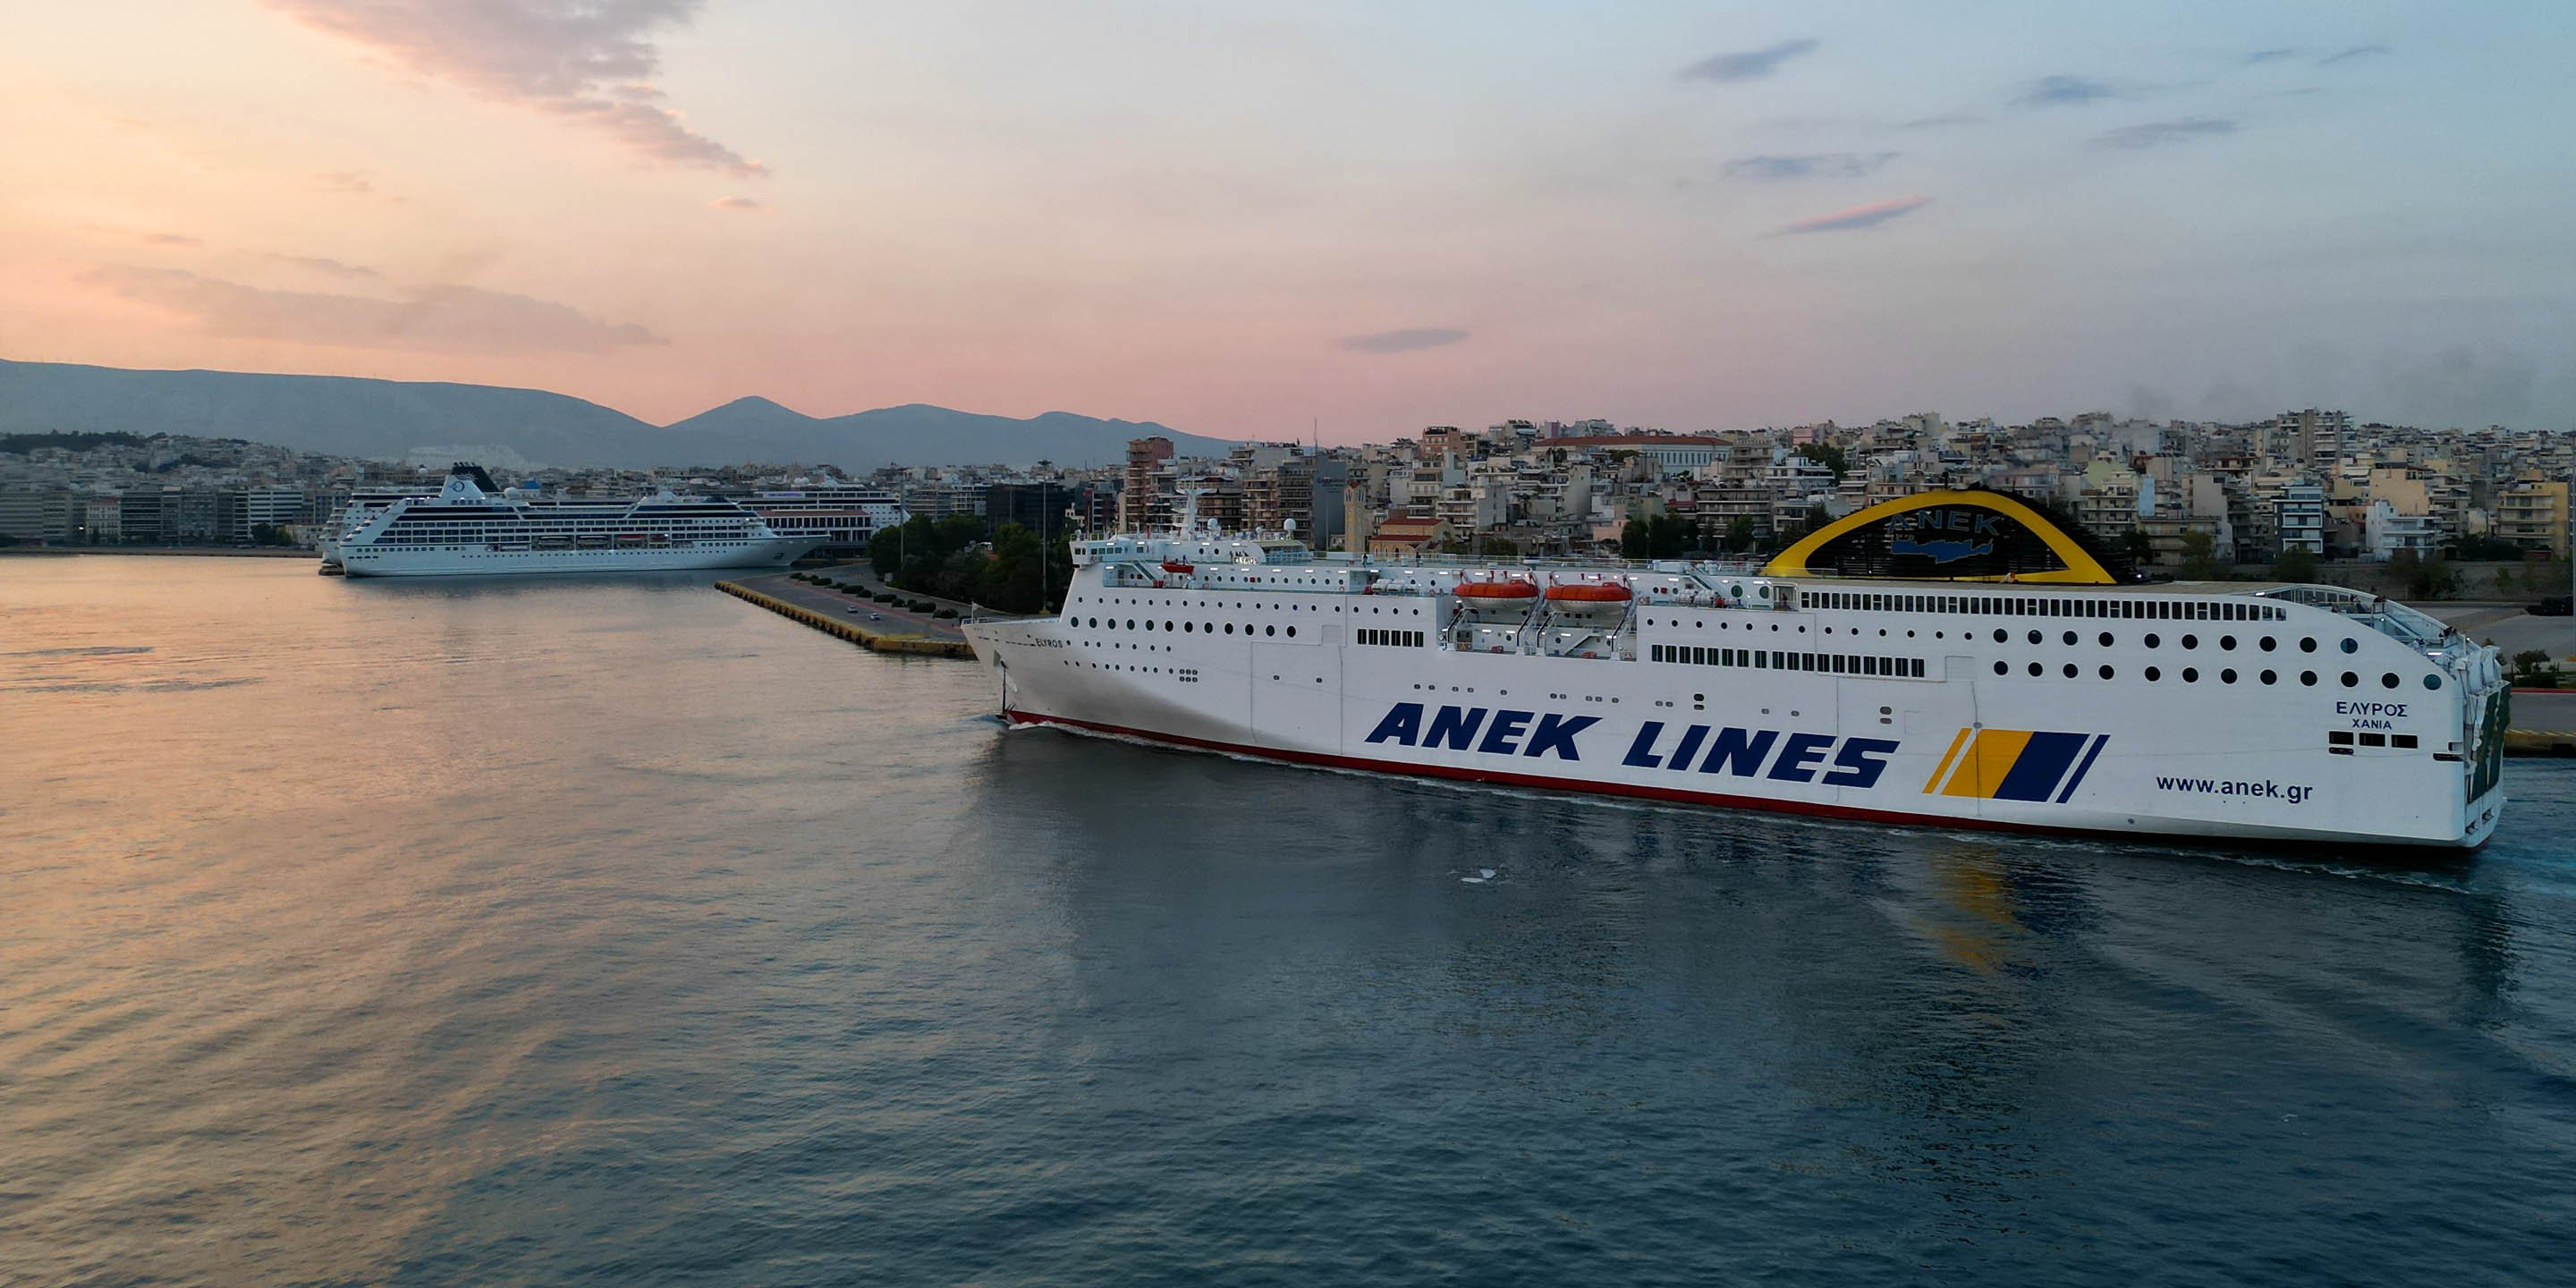 The conventional ferry Elyros in Piraeus port, getting ready for departure to Chania town in Crete